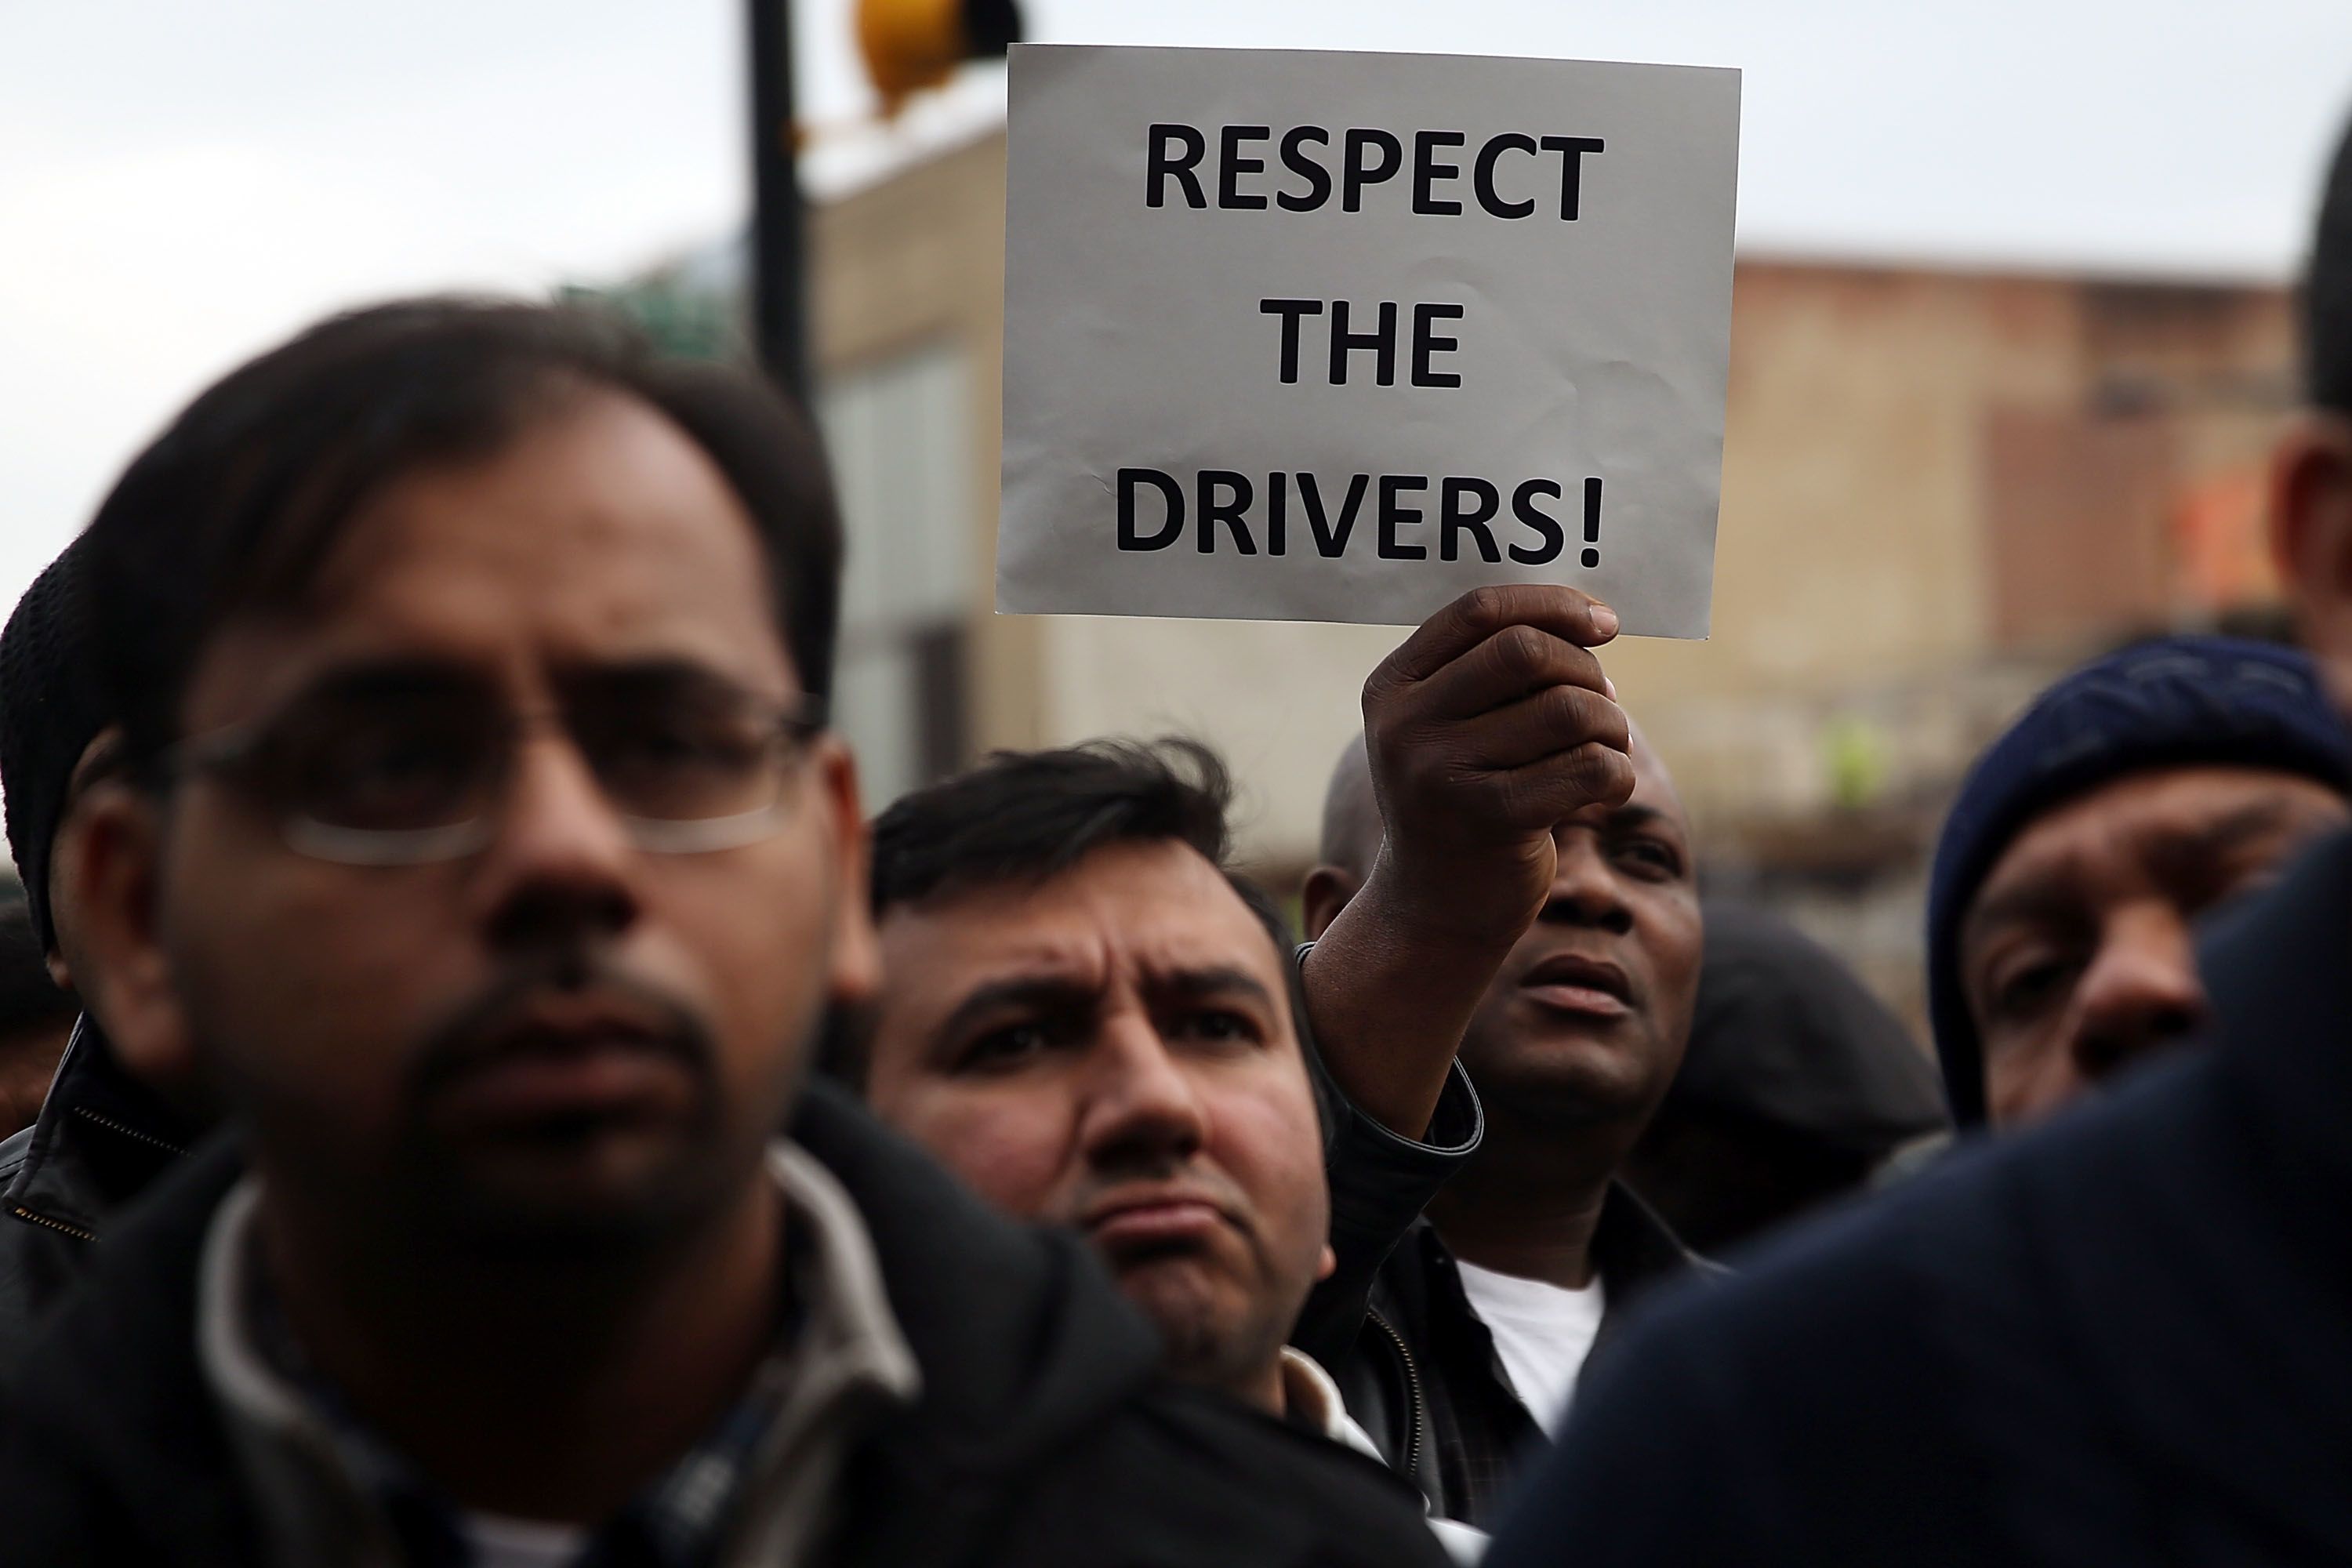 Uber, Lyft drivers to go on strike over low wages and benefits